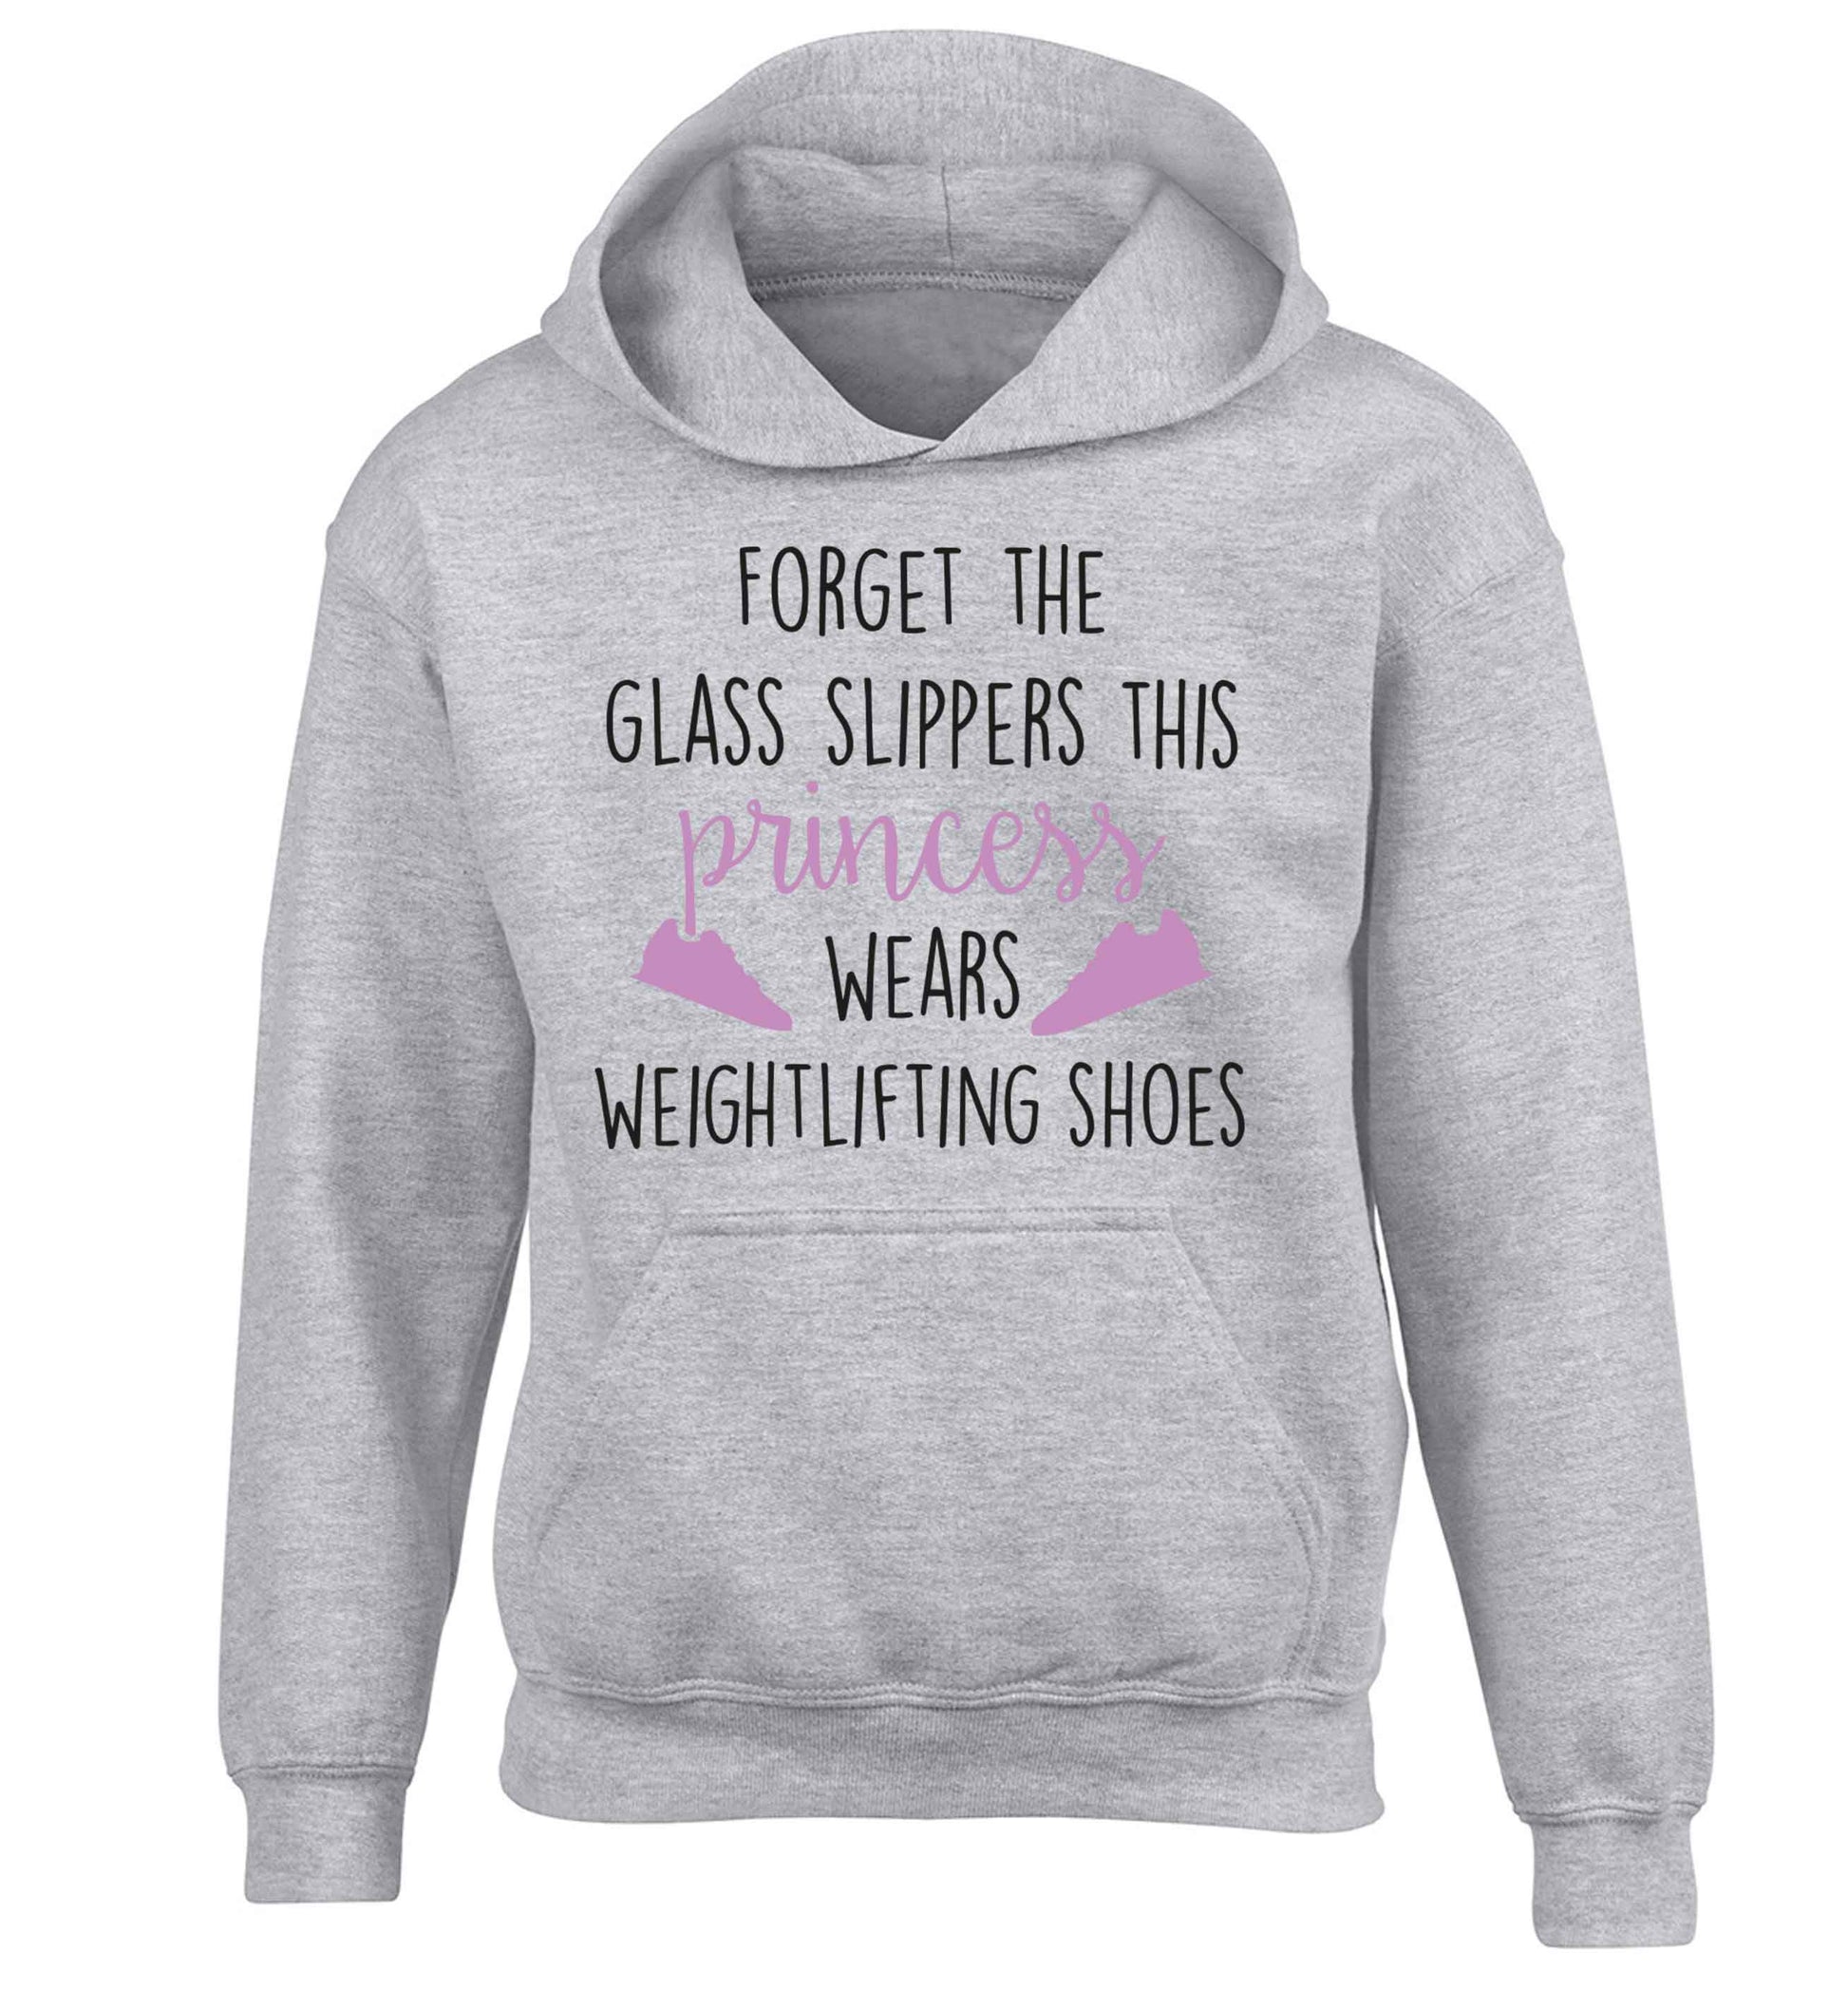 Forget the glass slippers this princess wears weightlifting shoes children's grey hoodie 12-13 Years